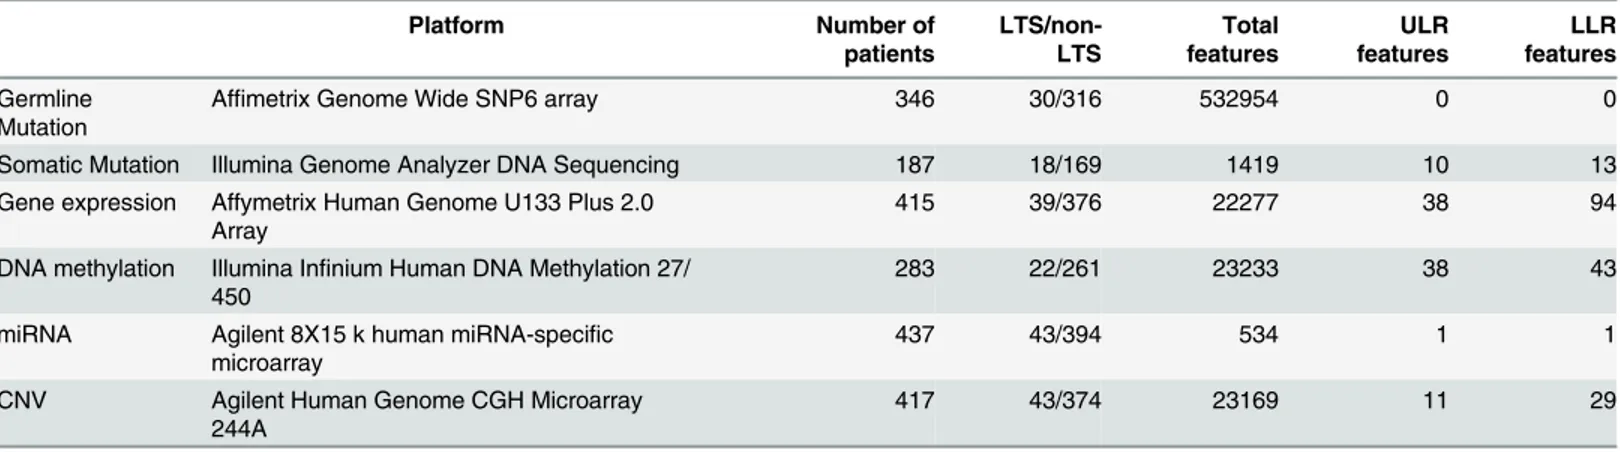 Table 2. Summary of the 6 types of molecular data and their platforms used for this study.